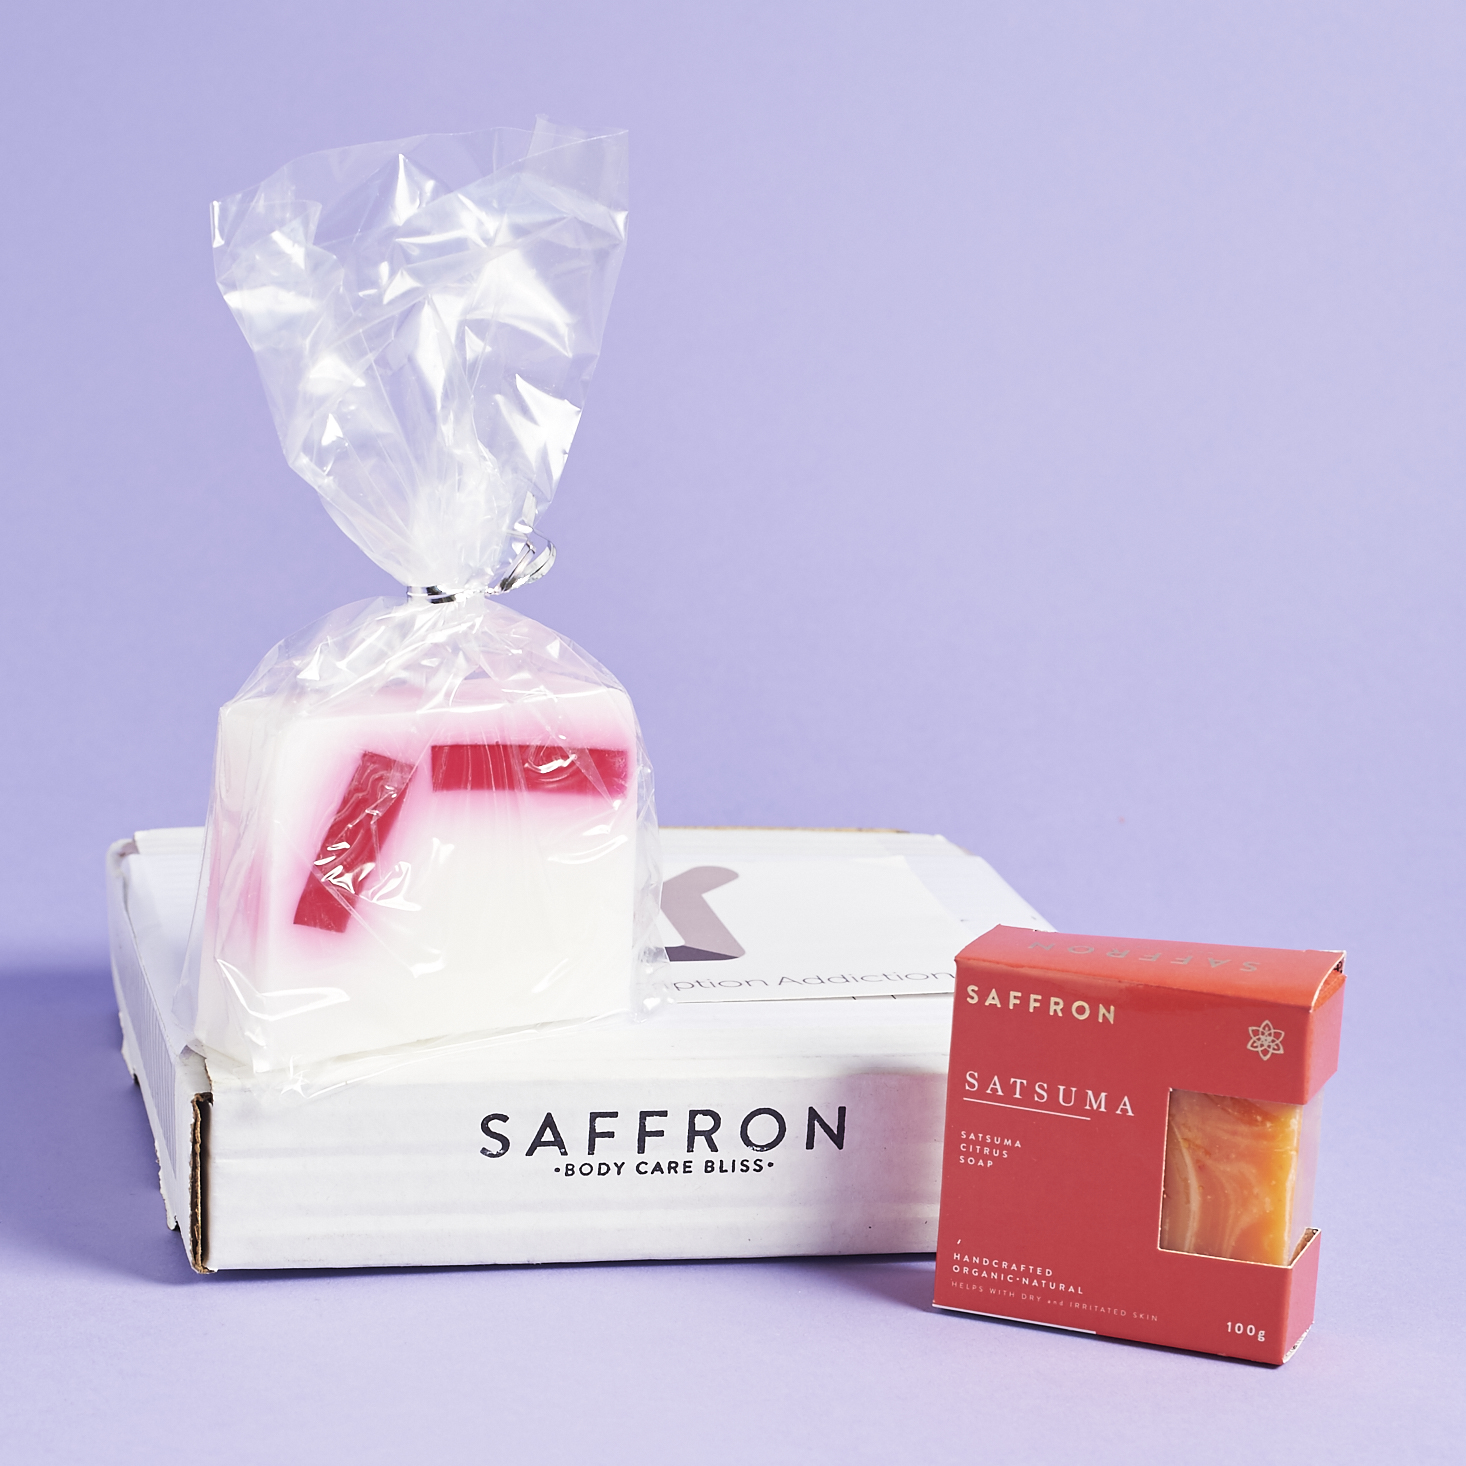 See what's inside the December 2016 Saffron Soap box!